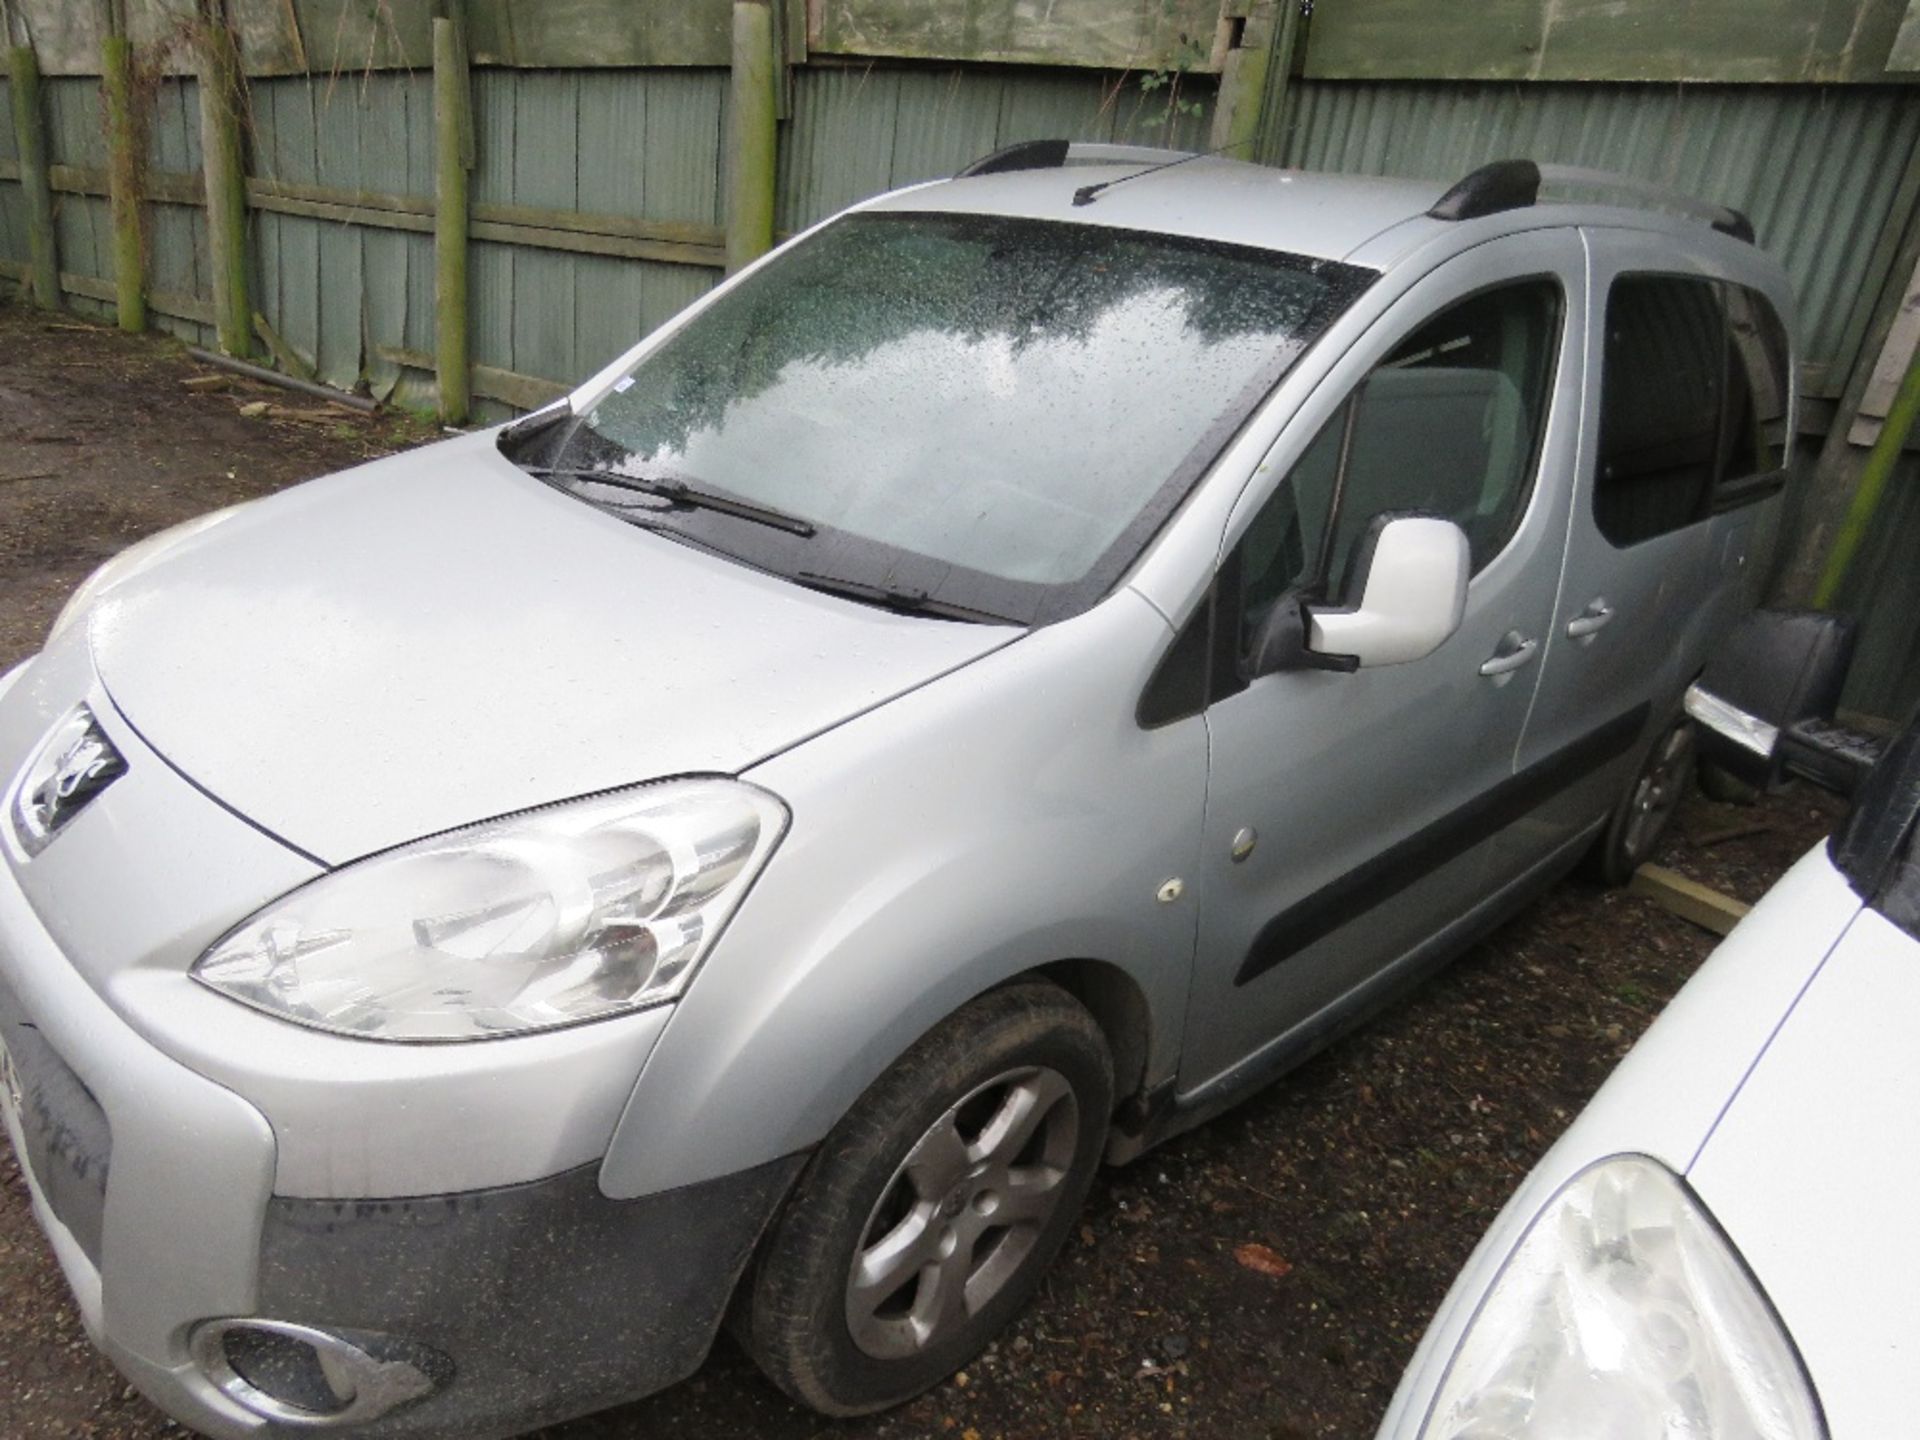 PEUGEOT PARTNER CAR REG:AXZ 3843. WITH V5 FIRST REGISTERED 23/10/2010. MOT EXPIRED. MANUAL GEARBOX. - Image 8 of 8